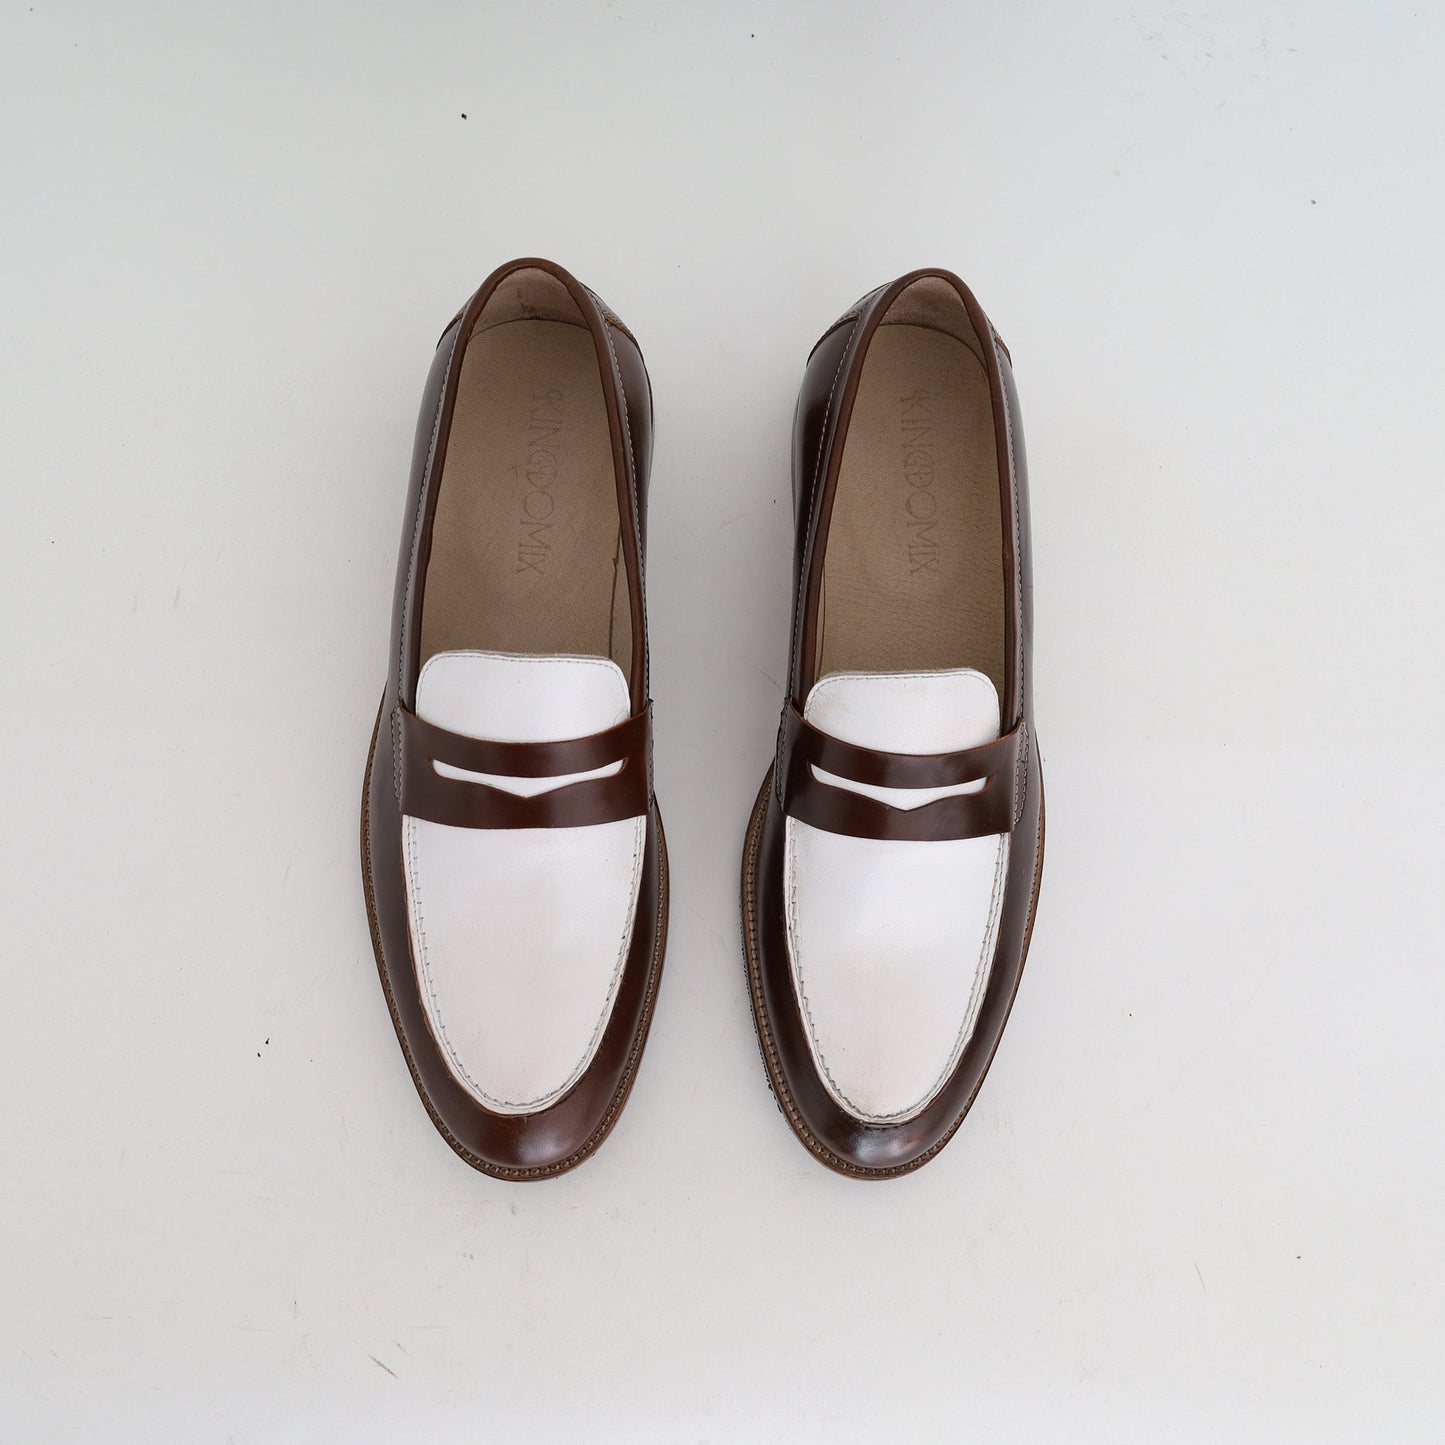 Juba Brown x White Penny loafer